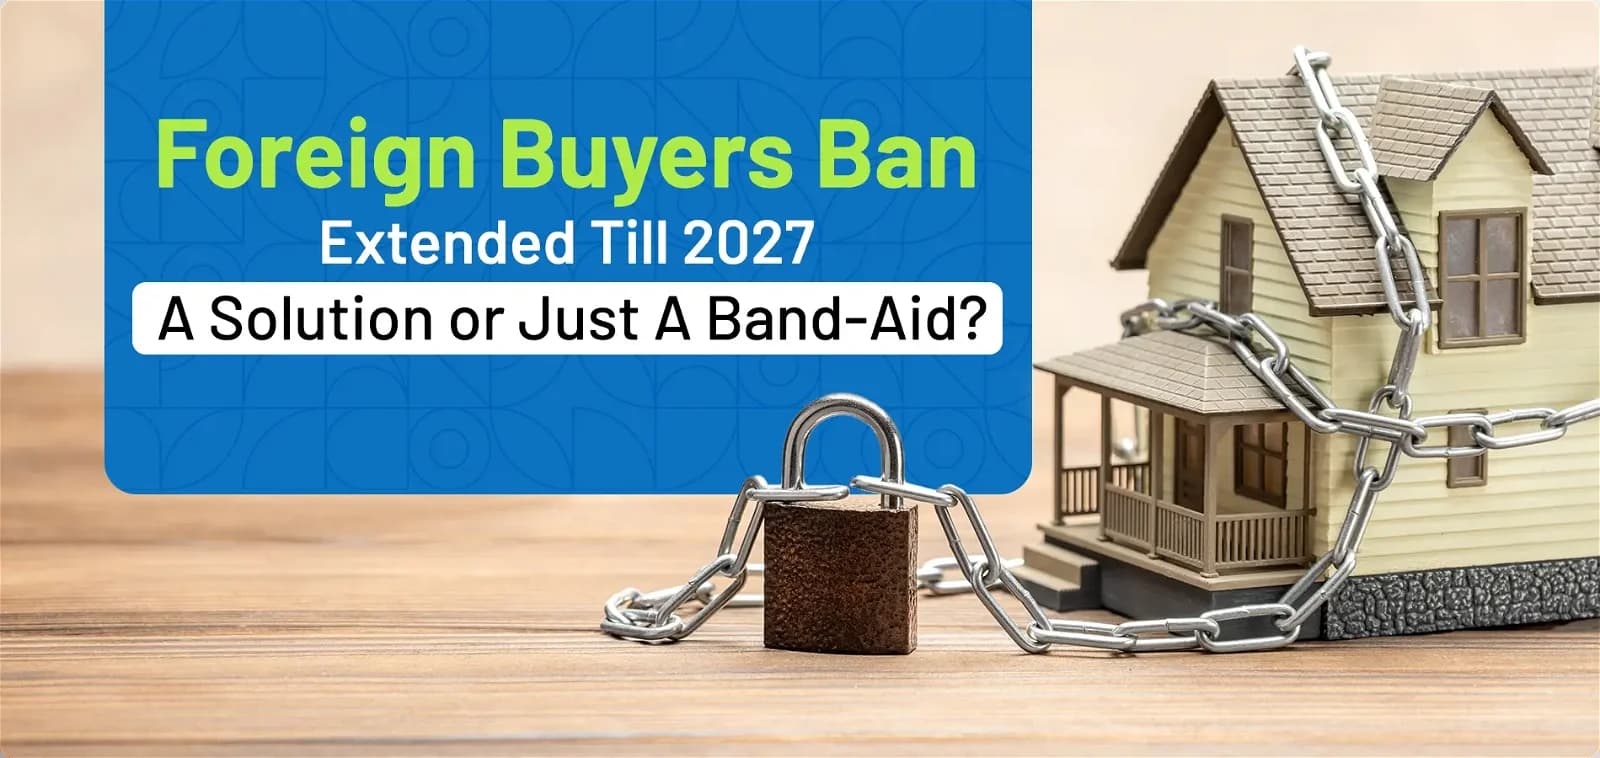 Foreign Buyers Ban Extended Till 2027– A Solution or Just a Band-Aid?